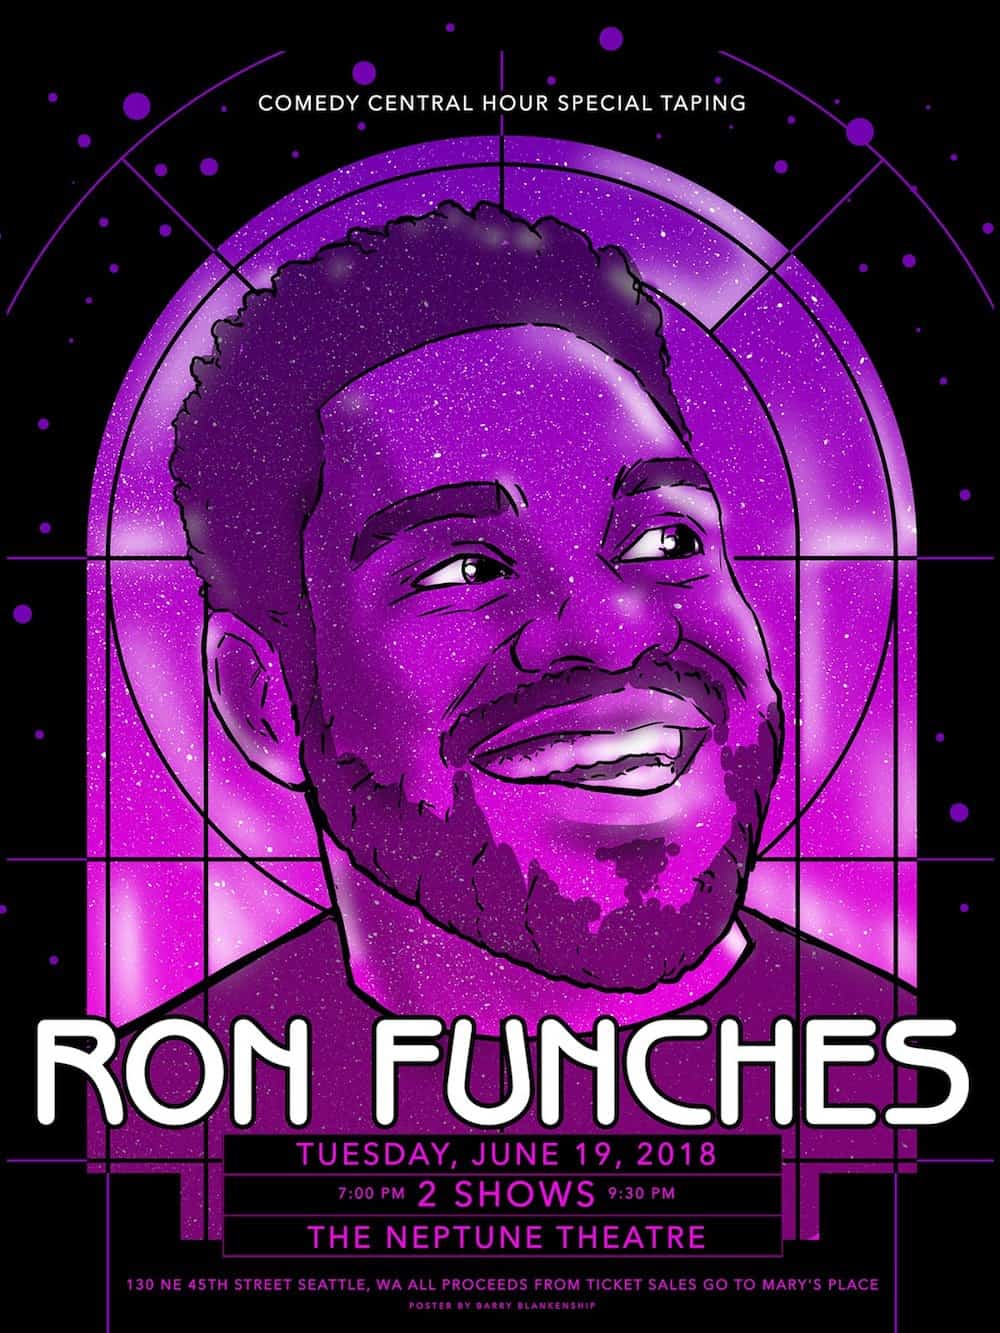 Puffing Joints and Wrestling Smacktalk with Comedian Ron Funches